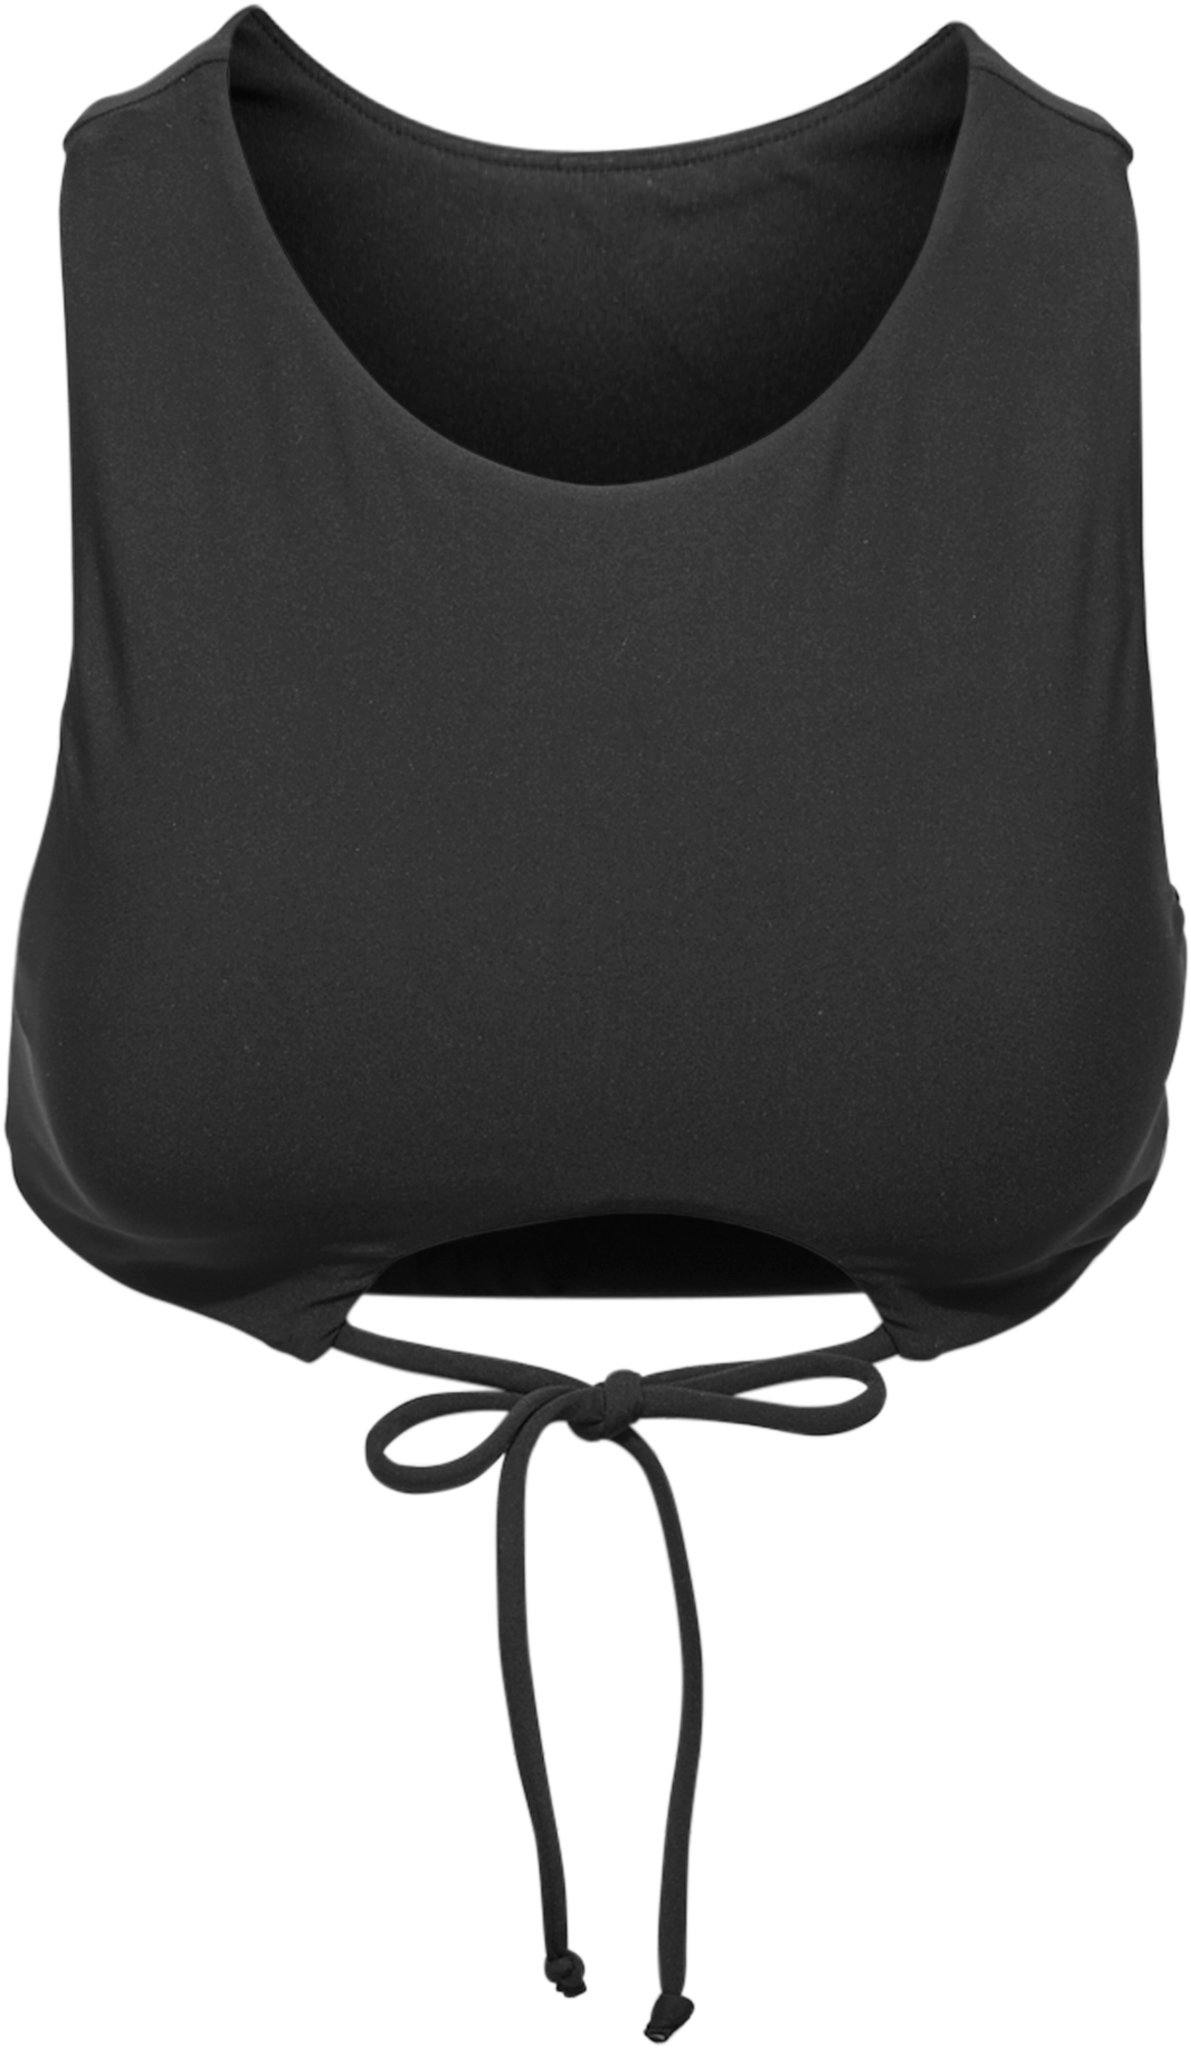 Product image for Simply Seamless High Neck Crop Top - Women's